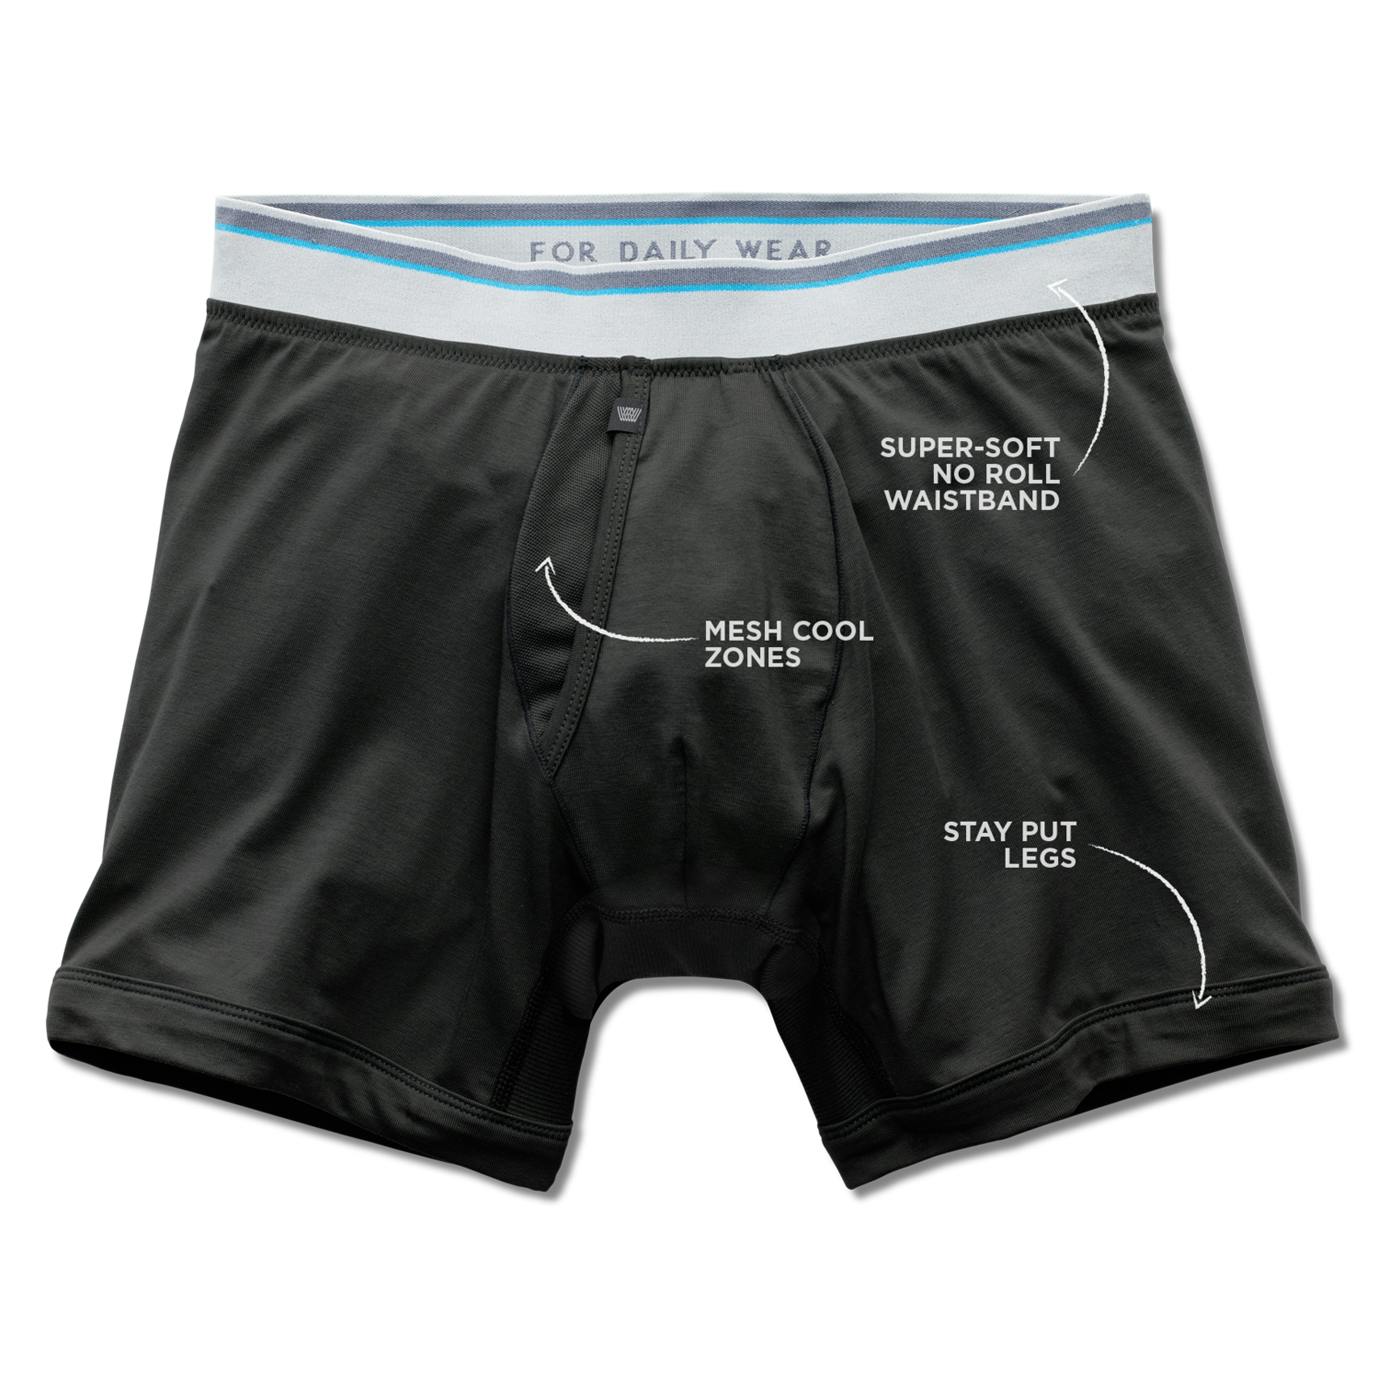 NWOT Black 18-Hour Boxer Brief from Mack Weldon, Size Small